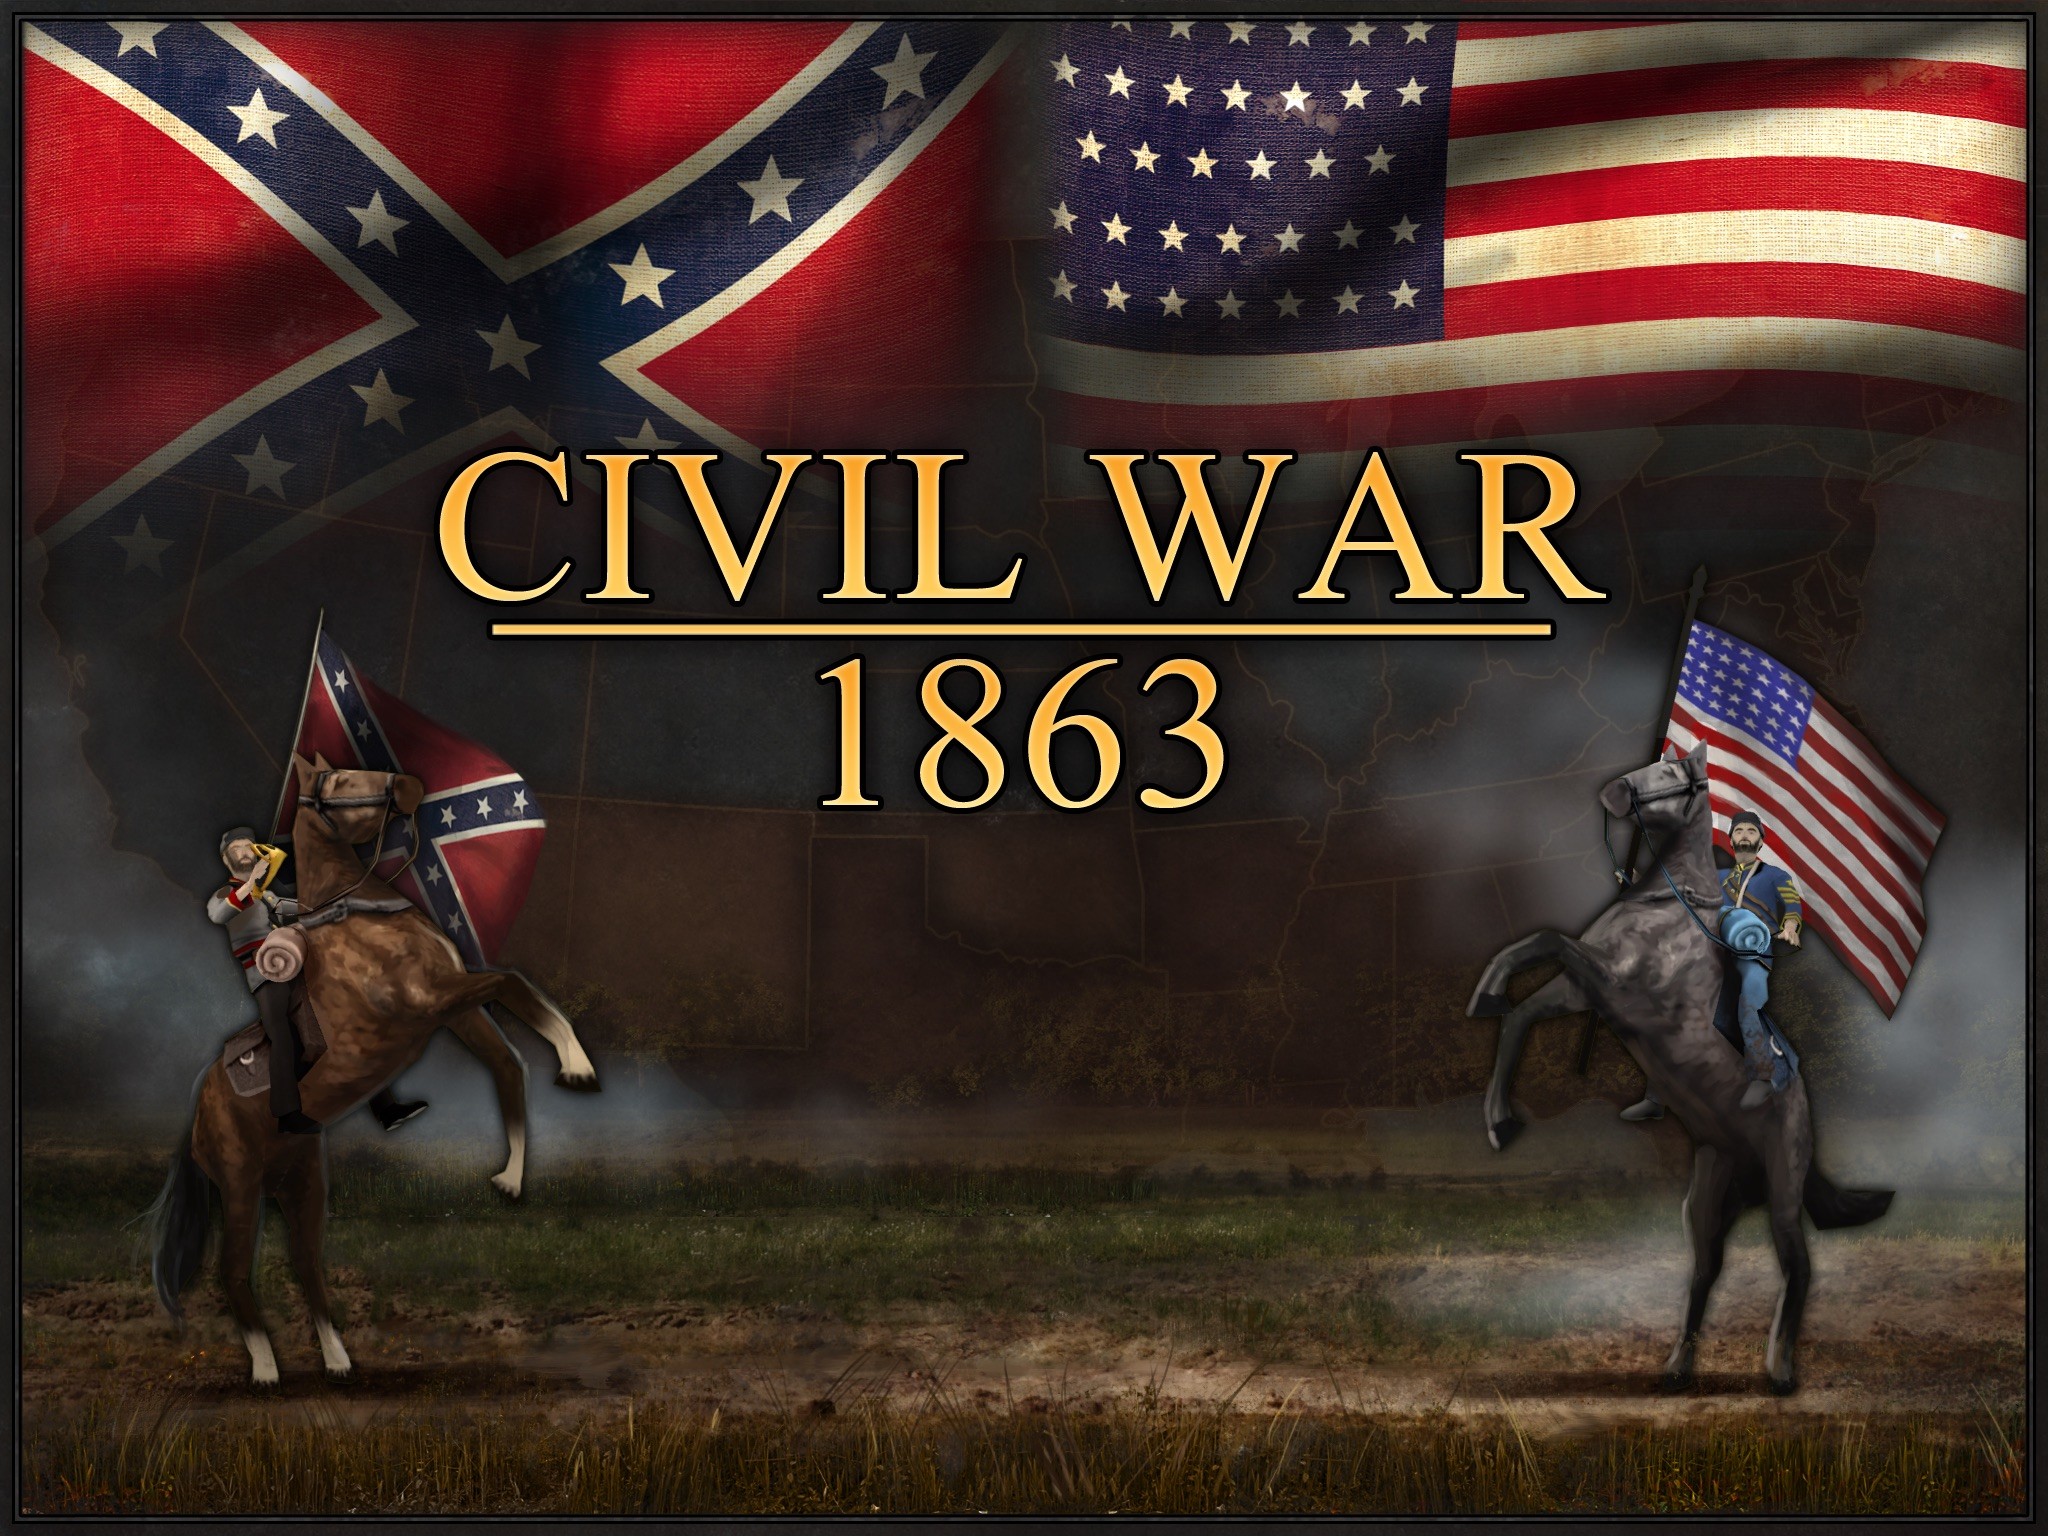 Apple Bans Games And Apps Featuring The Confederate Flag Update Some Games Being Restored TechCrunch